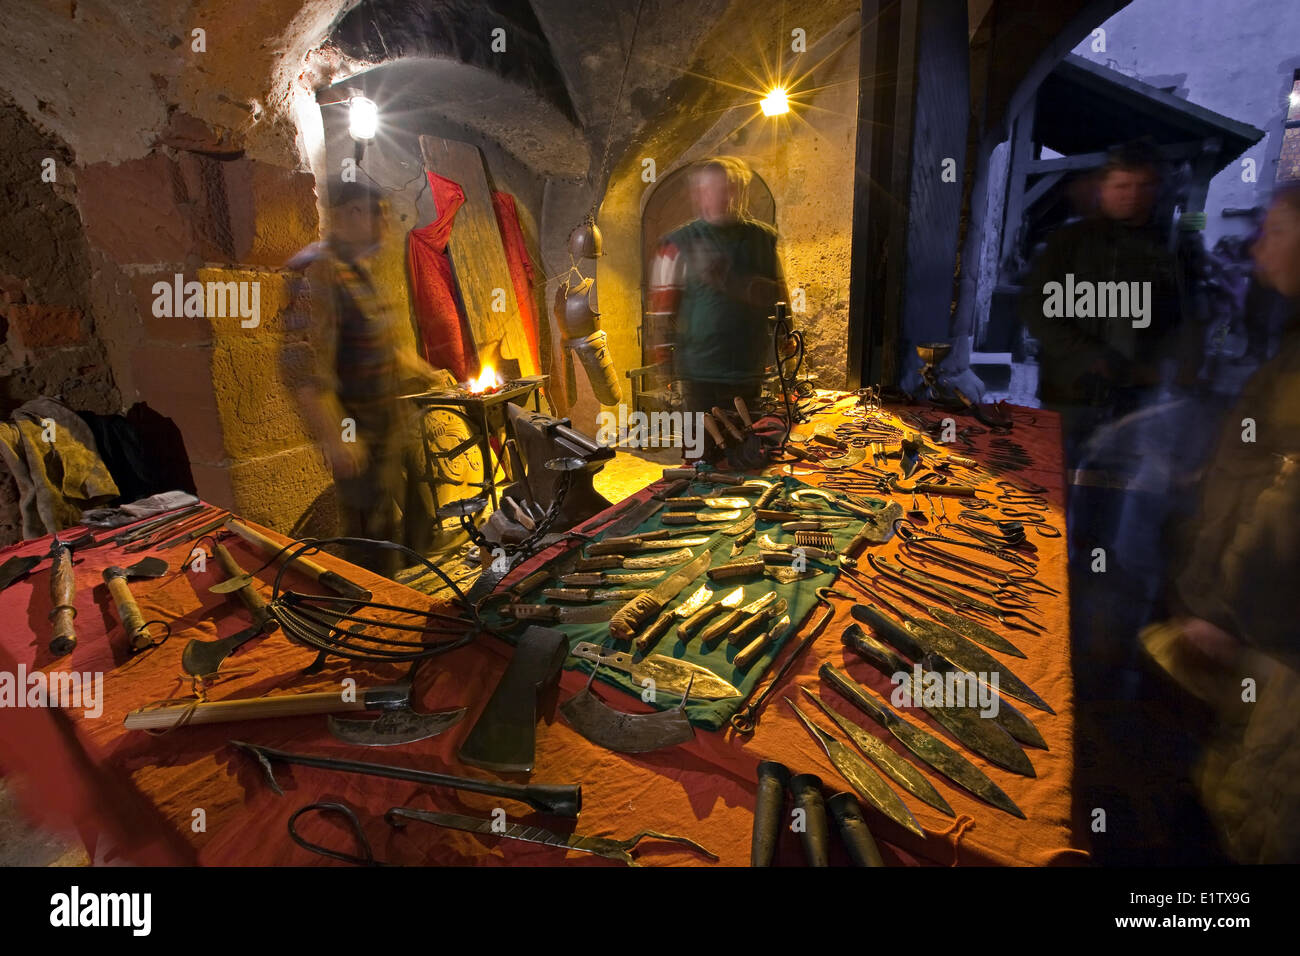 Market stall at the medieval markets in Burg Ronneburg (Burgmuseum), Ronneburg Castle, Ronneburg, Hessen, Germany, Europe. Stock Photo